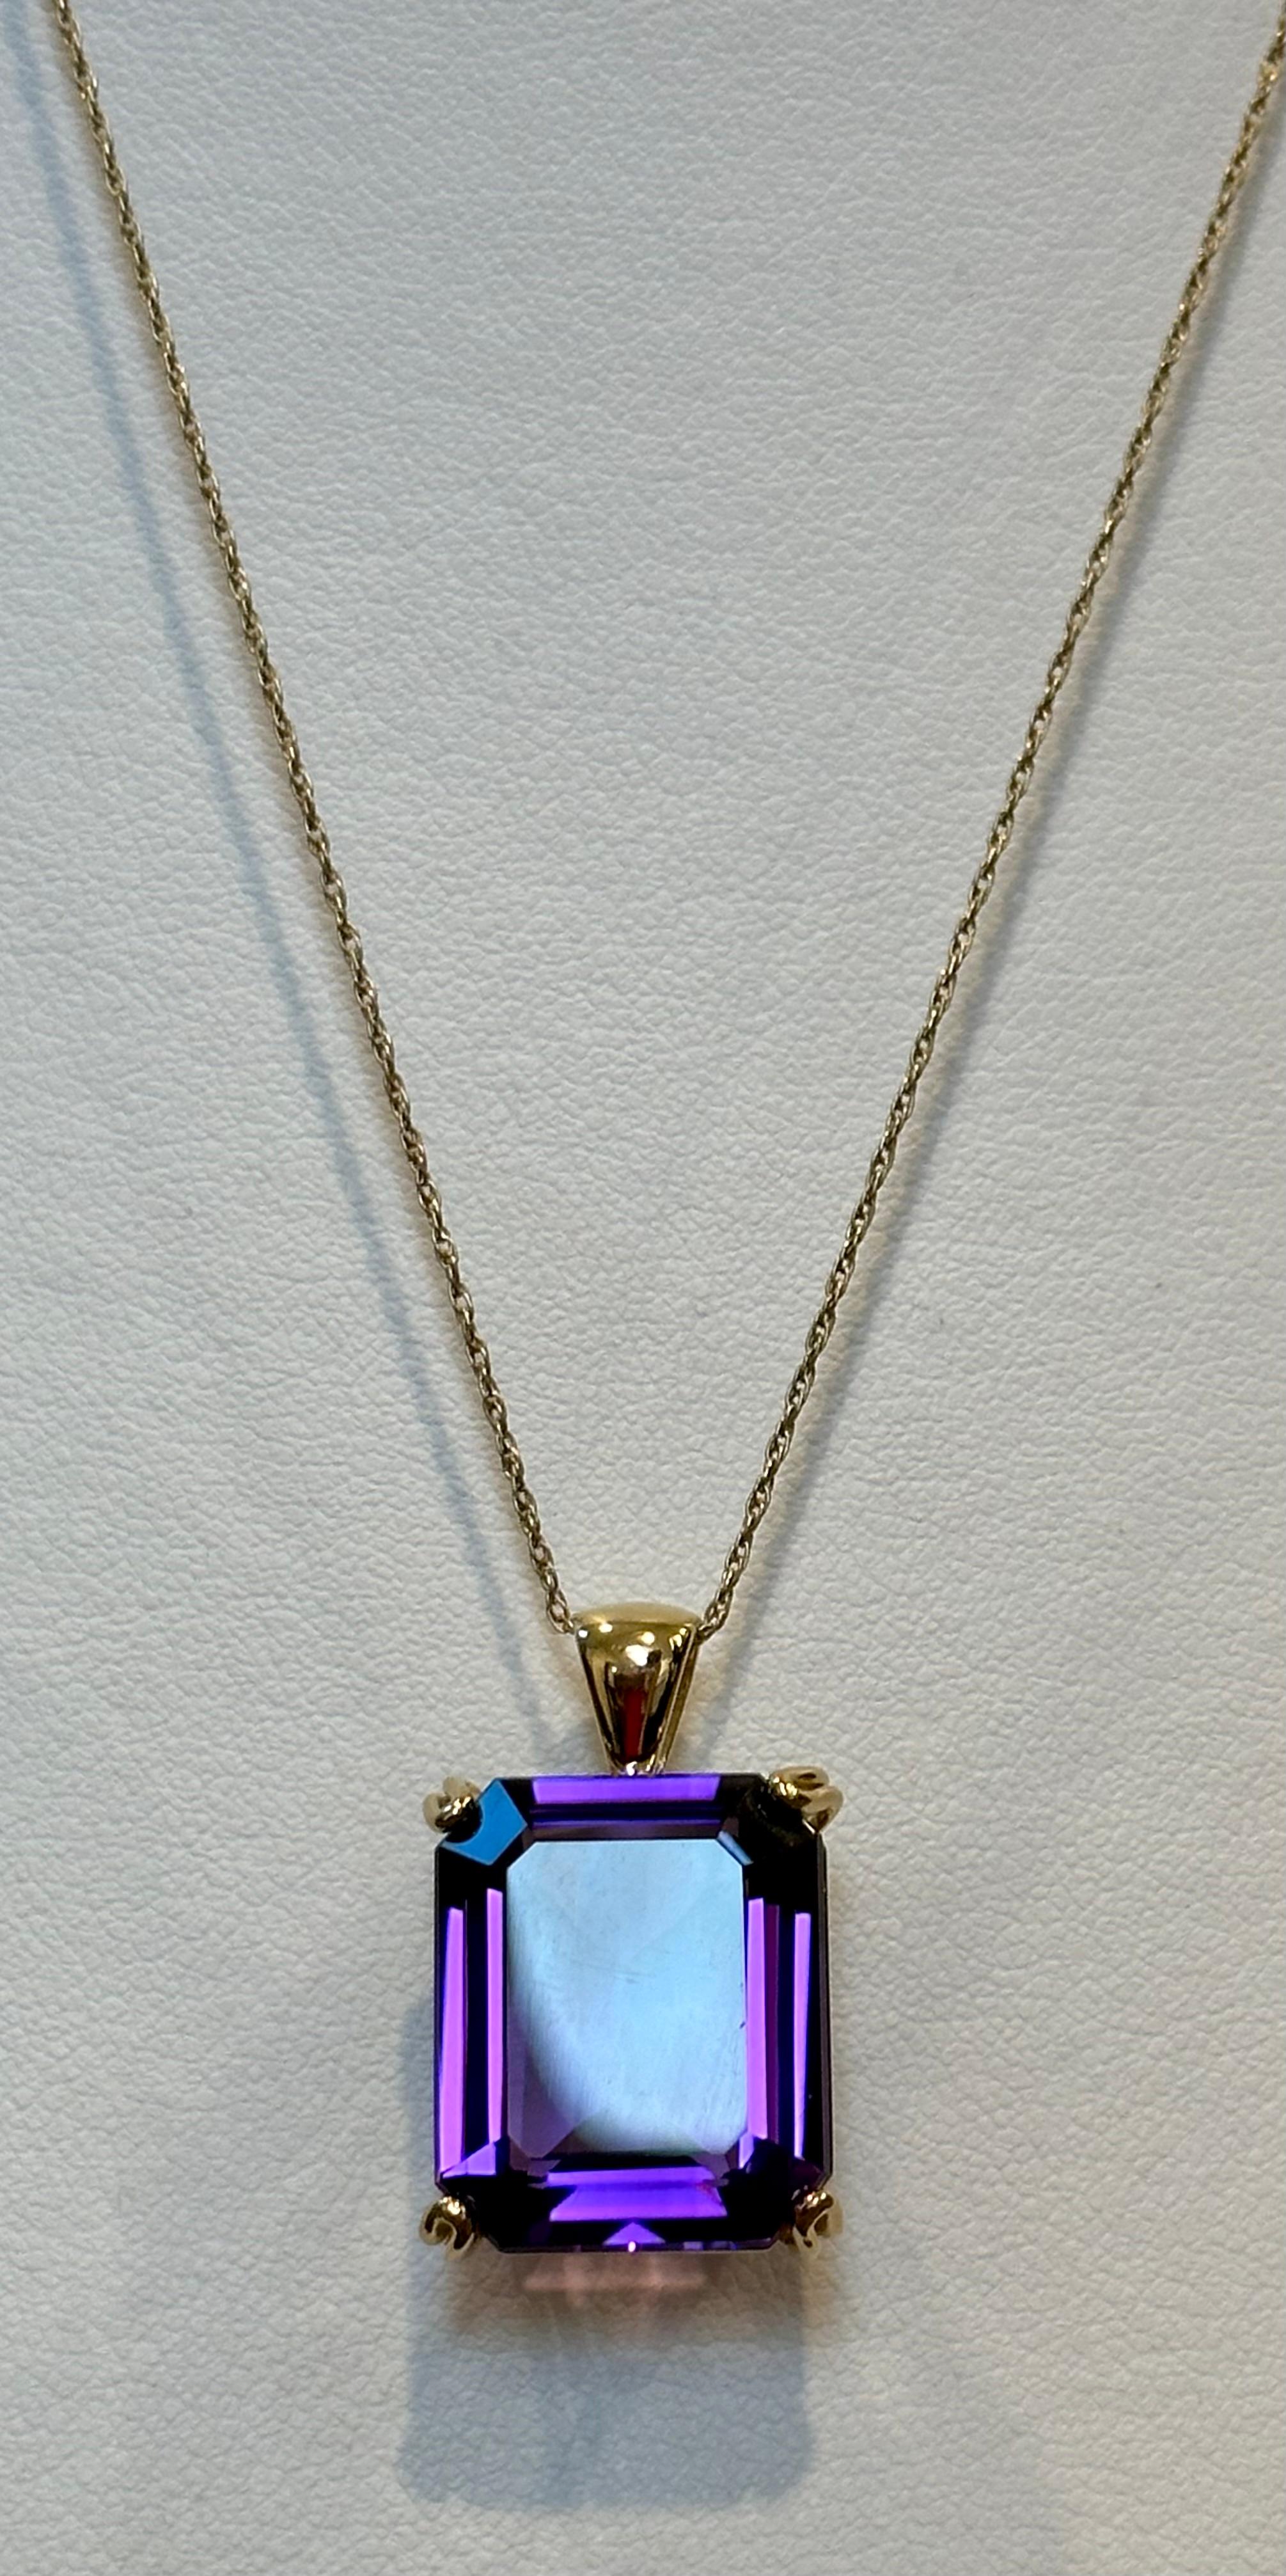 14 Ct Emerald Cut Amethyst Pendant/Neck 18Kt  Gold + 14 Kt Yellow Gold Chain For Sale 6